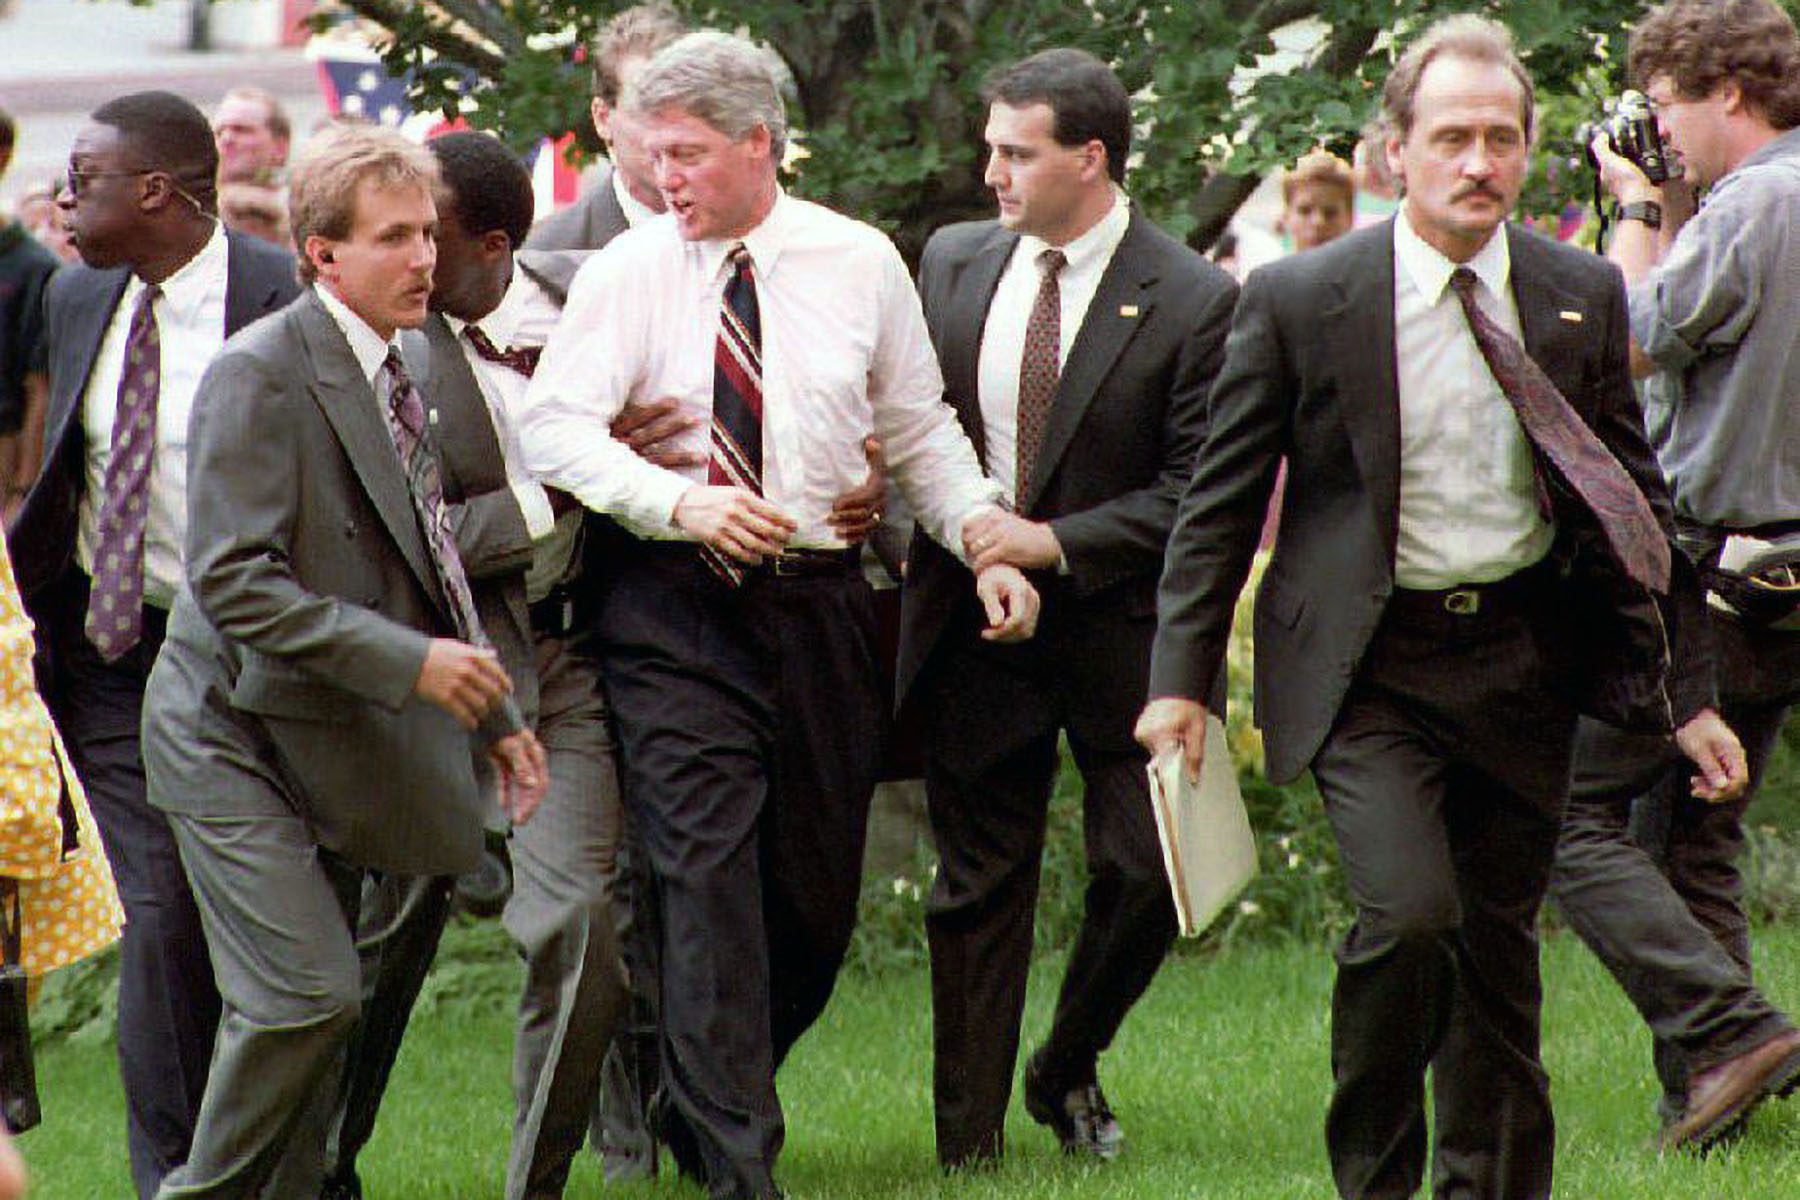 Bill Clinton is surrounded by secret service as they move him away from a crowd.